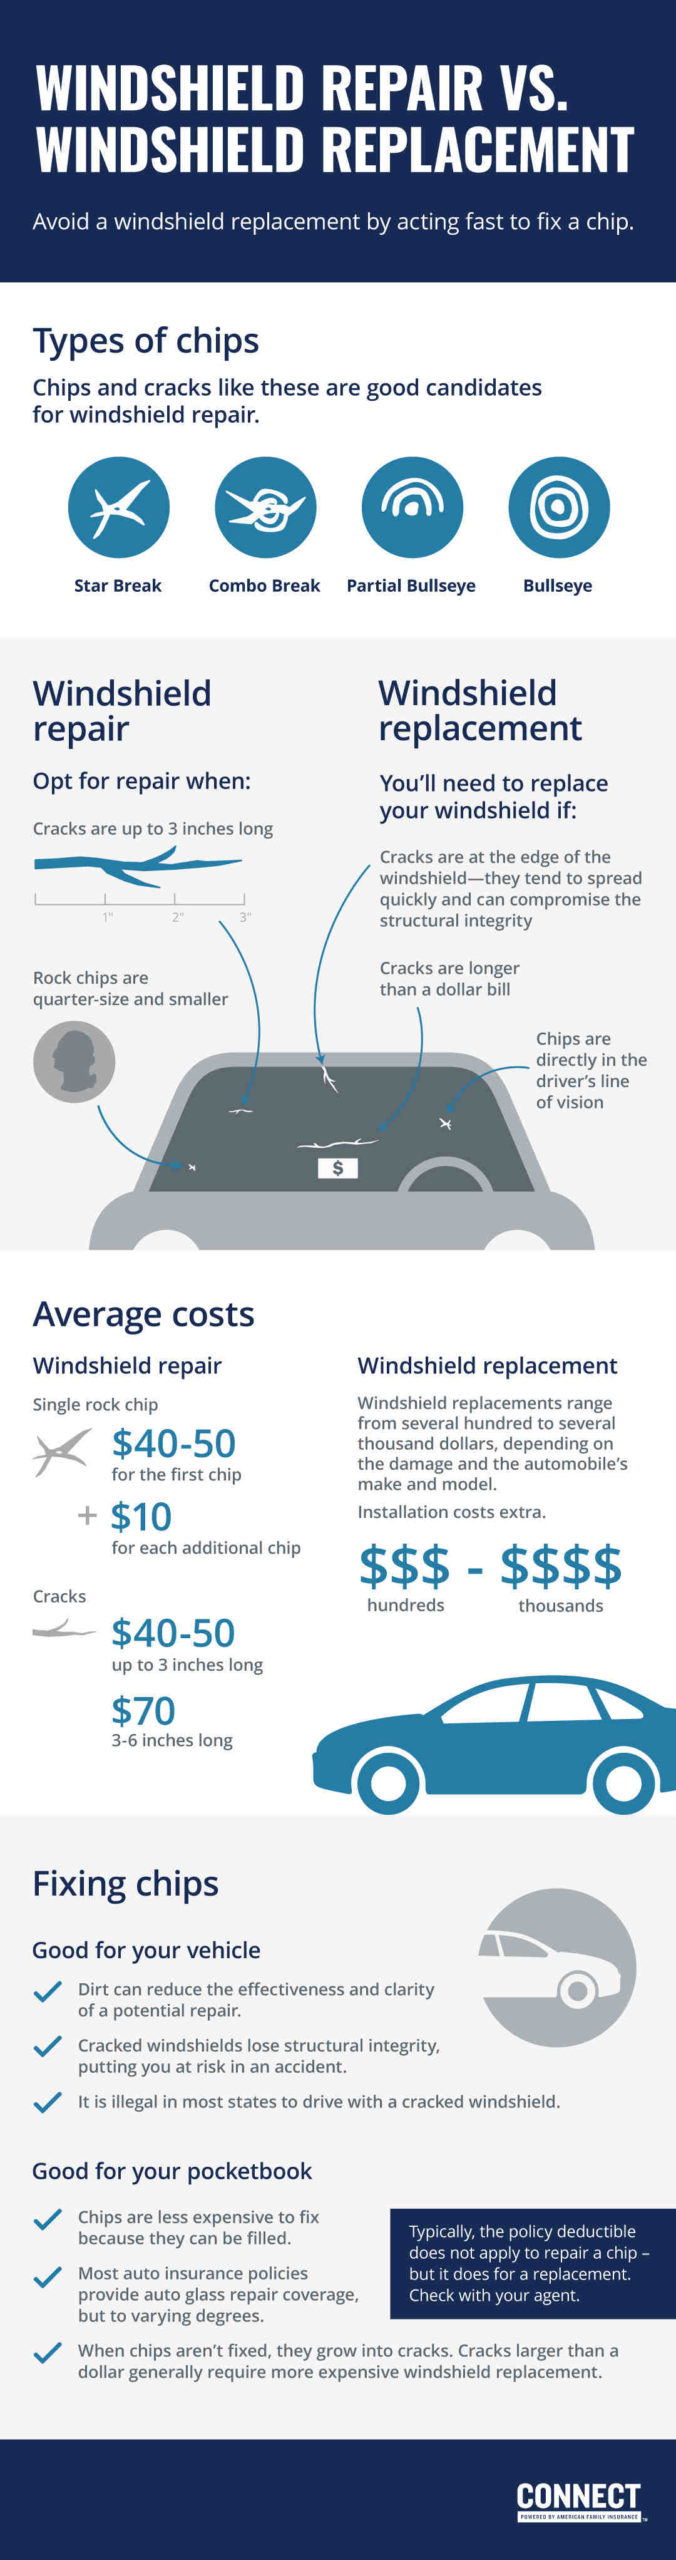 Can a windshield crack be repaired?